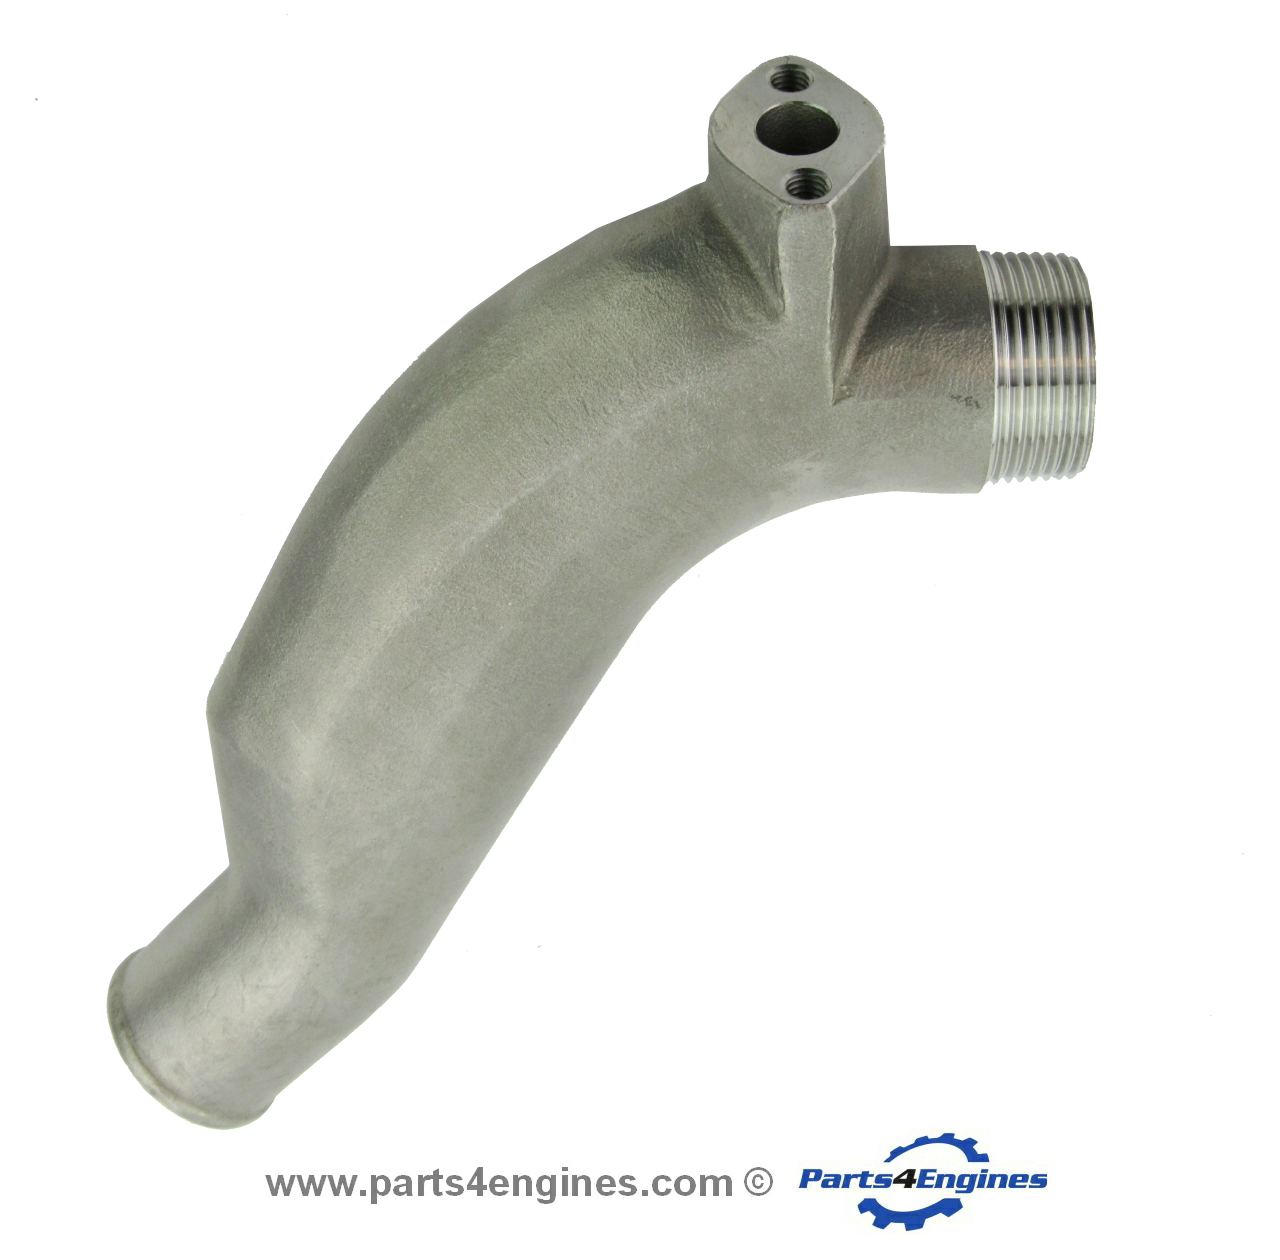 MD1B, MD2B, MD3B Stainless Steel Exhaust Outlet , from parts4engines.com